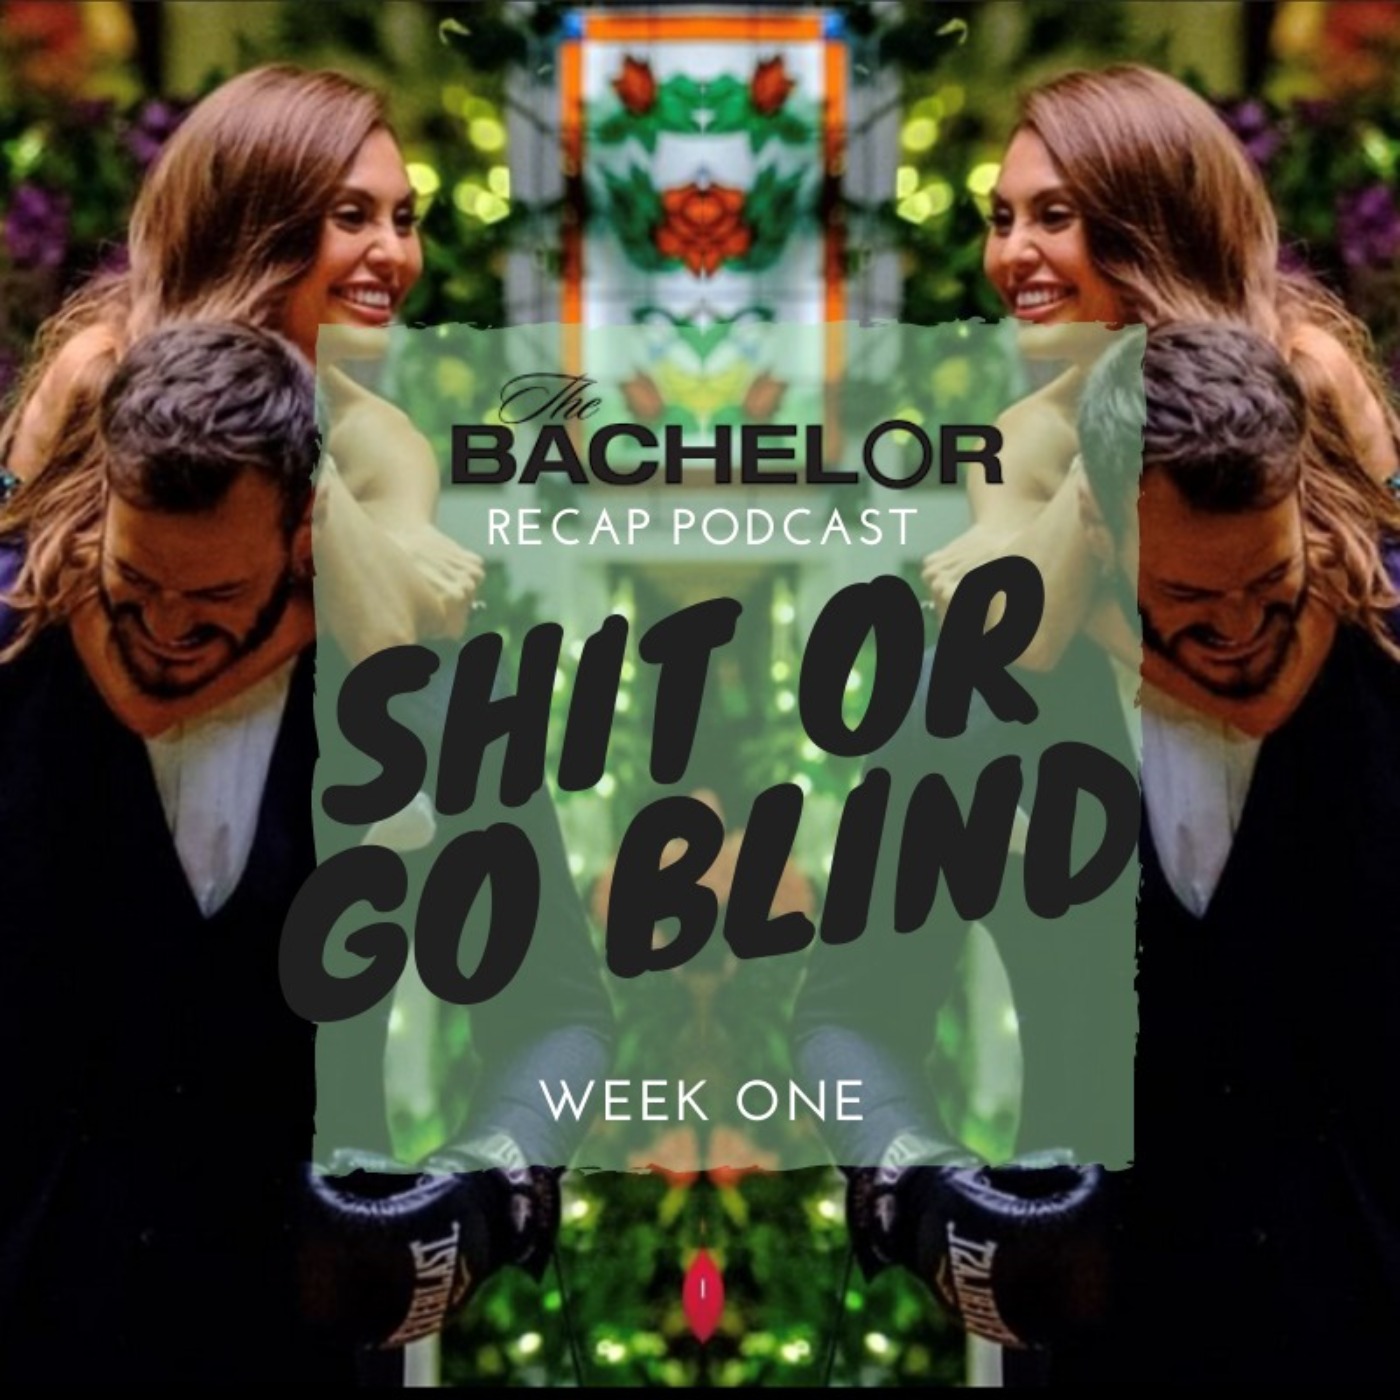 THE BACHELOR week one: Shit or go blind